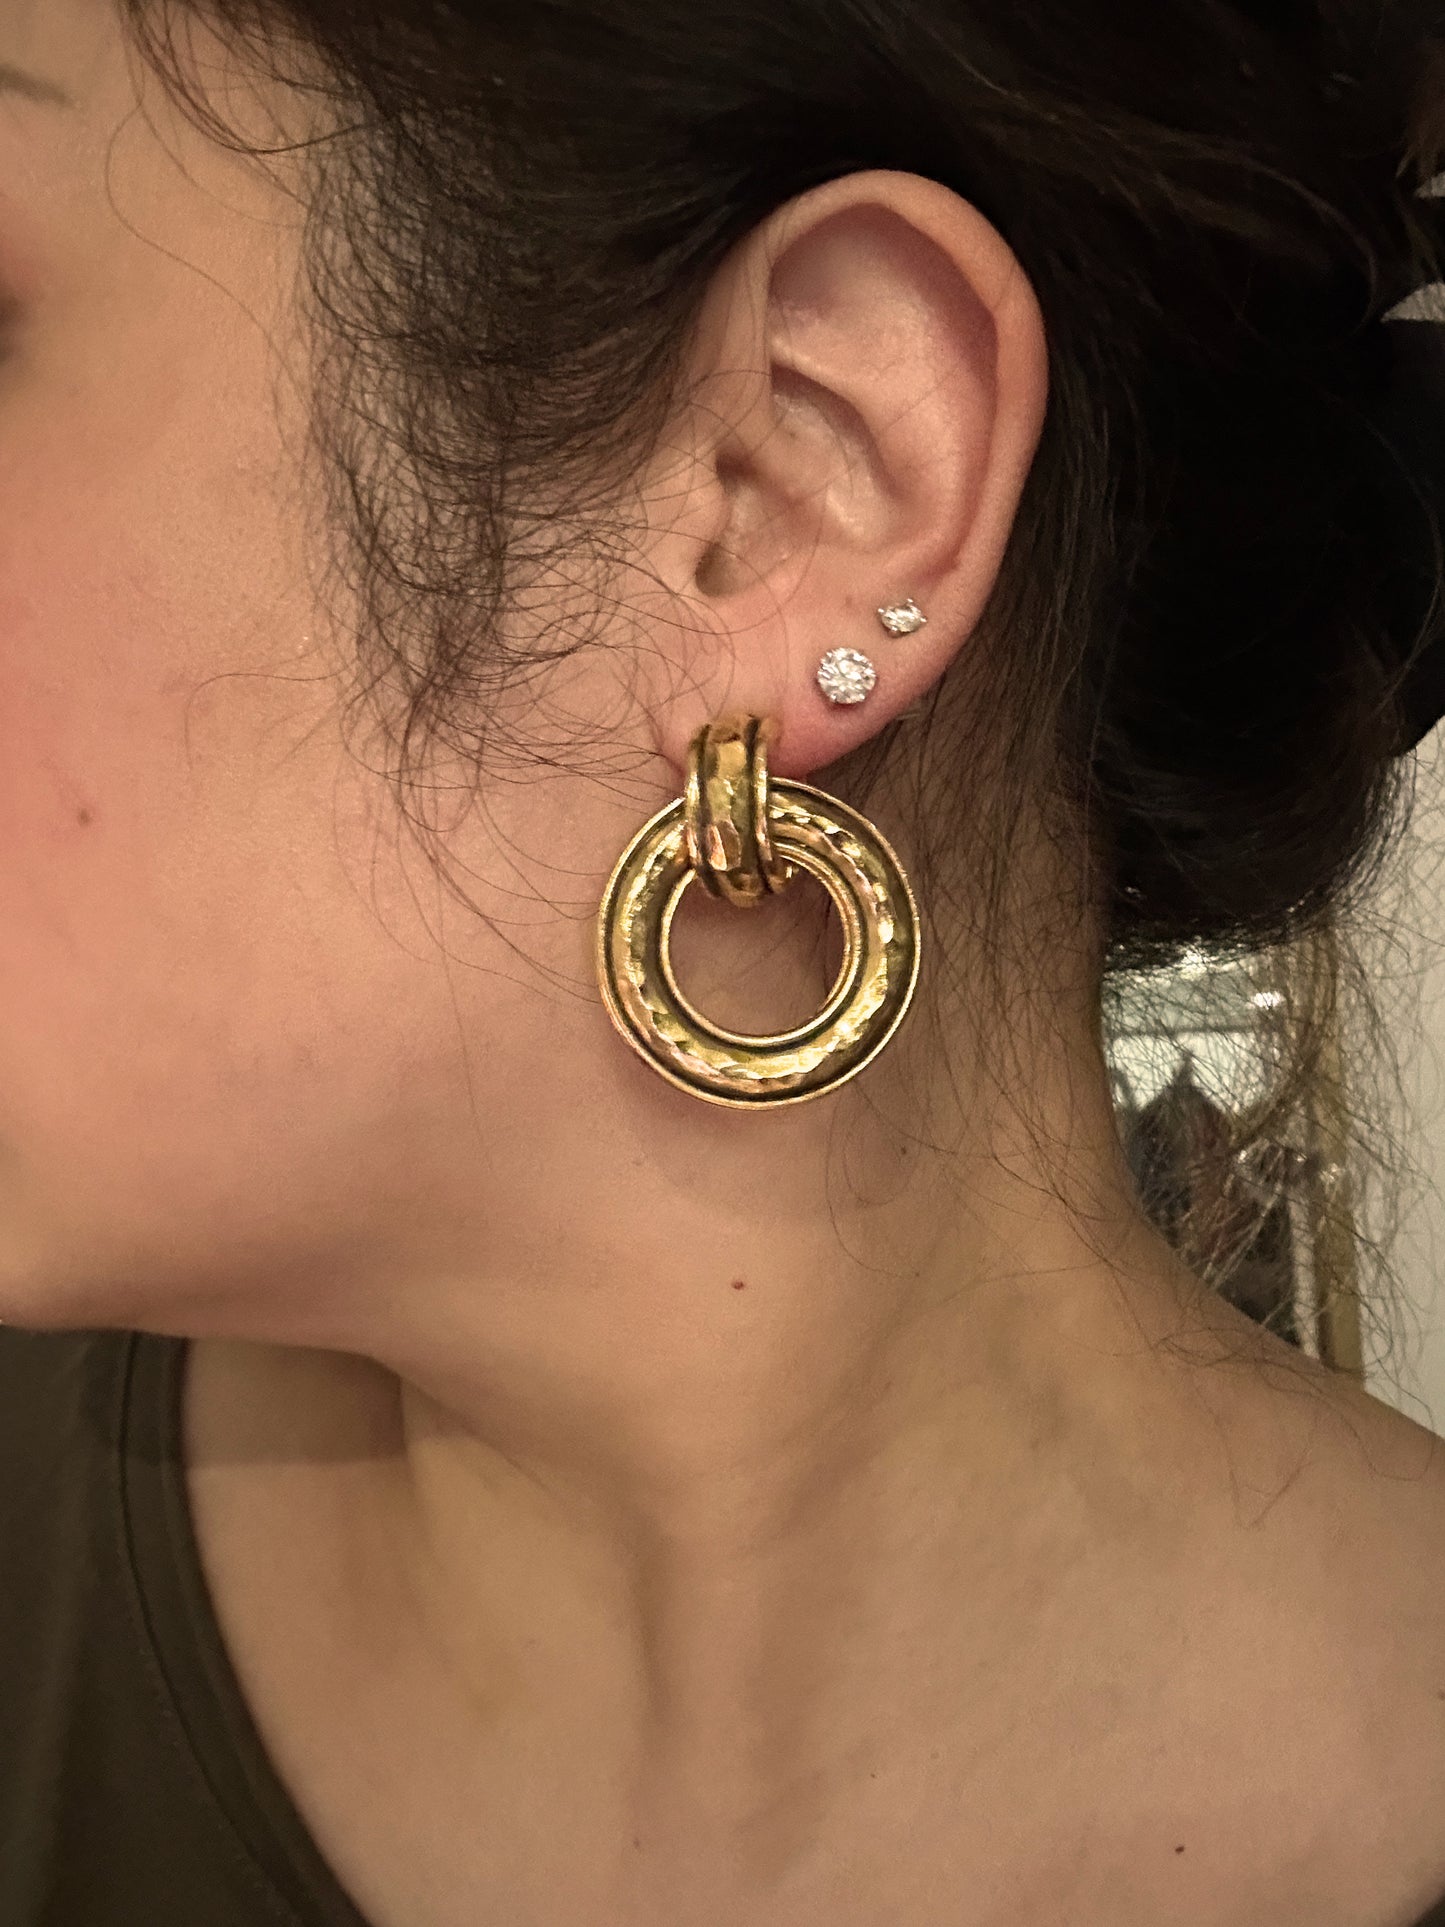 CHANEL VINTAGE 100% Authentic Genuine Clip On Two-way Hoop Earrings in Gold, 1990's, Made In France